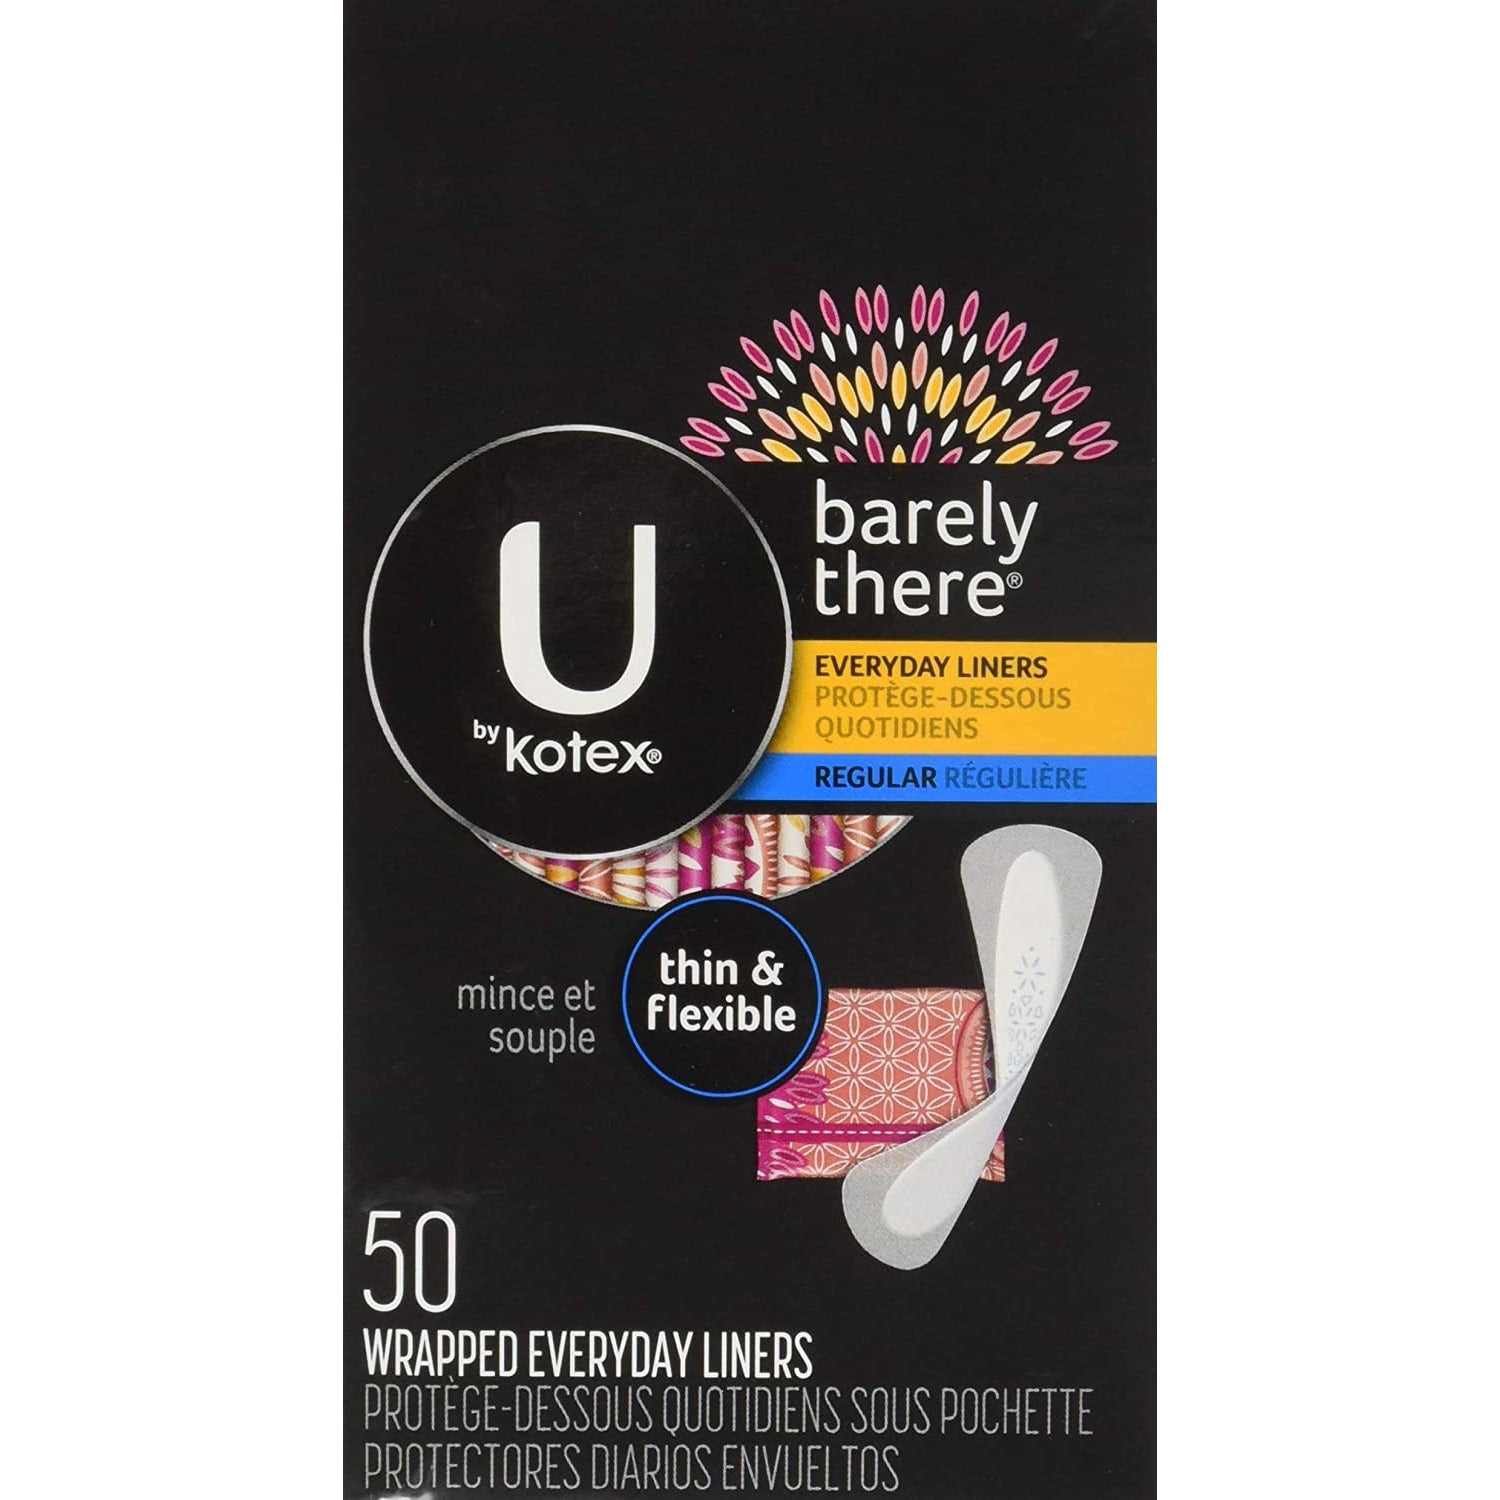 U by Kotex Barely There Everyday Liners, 50 Ct